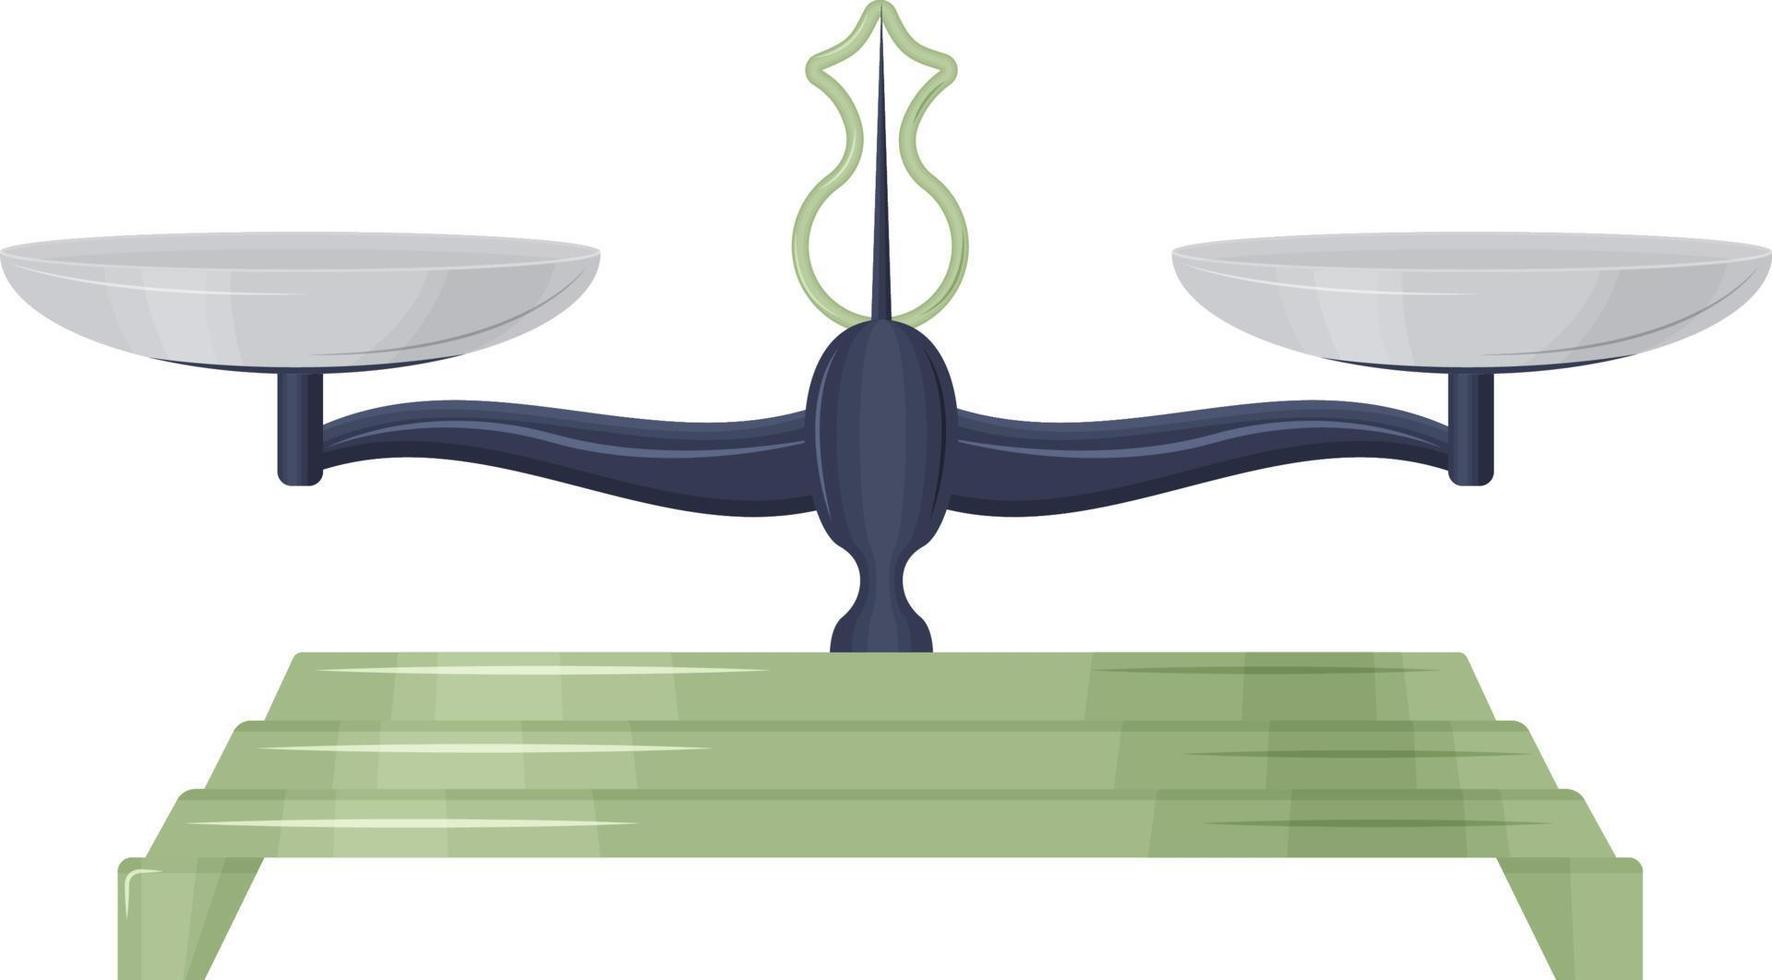 Trade scales for weighing products, and other various items, consisting of a black case, a green stand and silver cups. Vector illustration isolated on a white background.